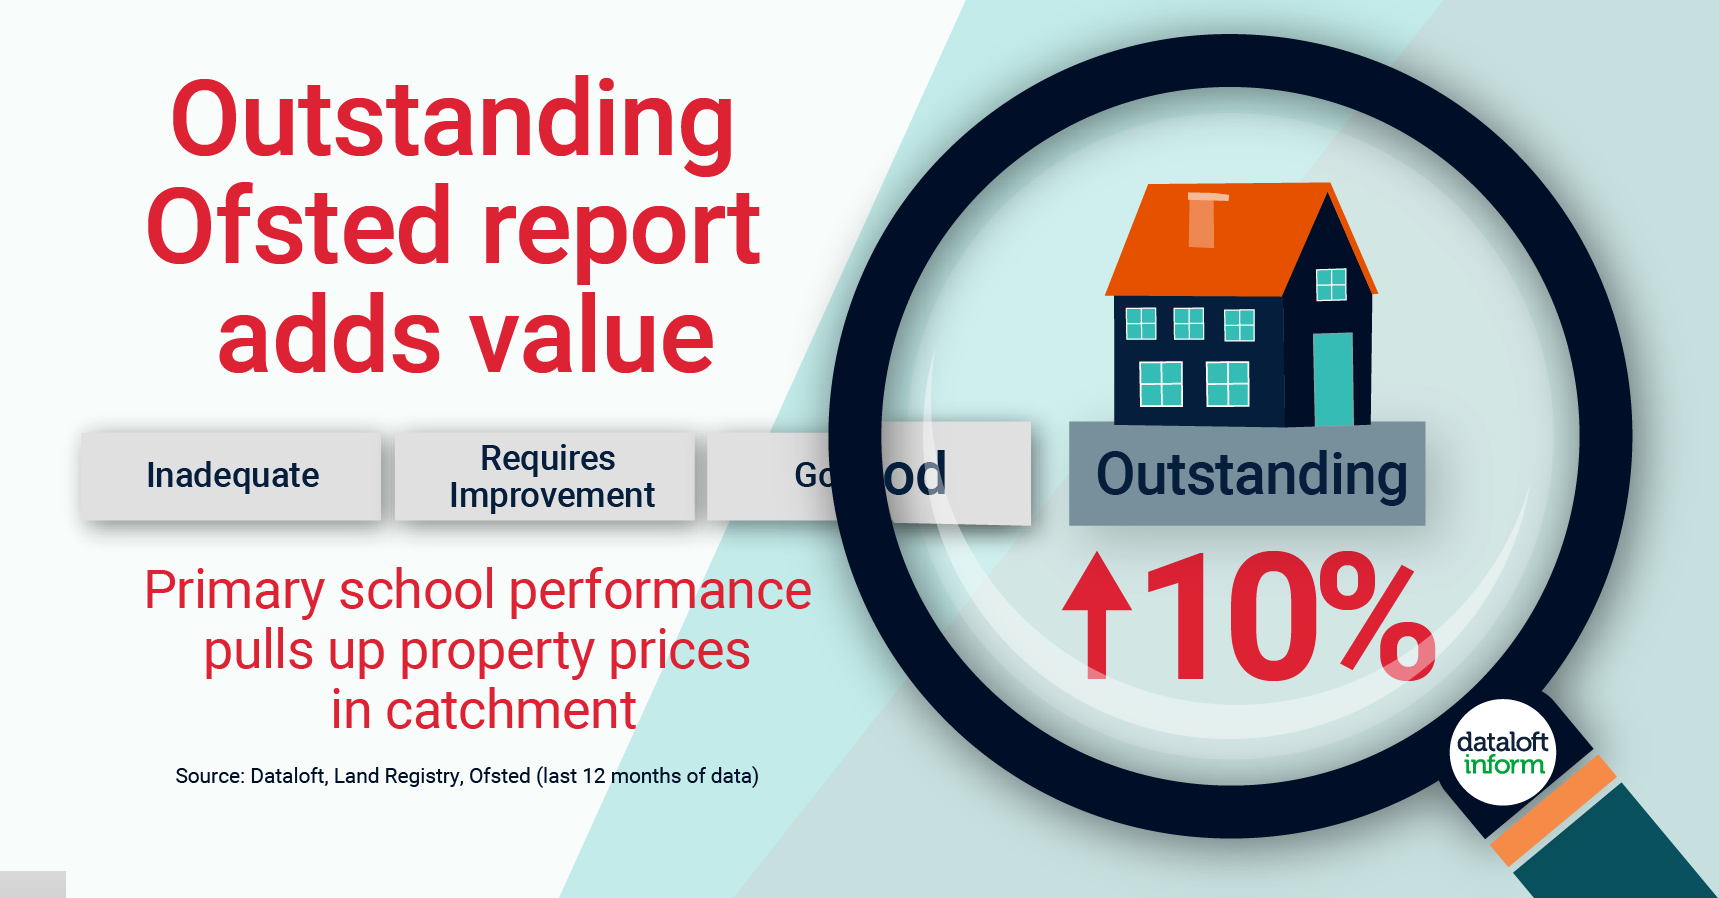 Outstanding Ofsted report adds value